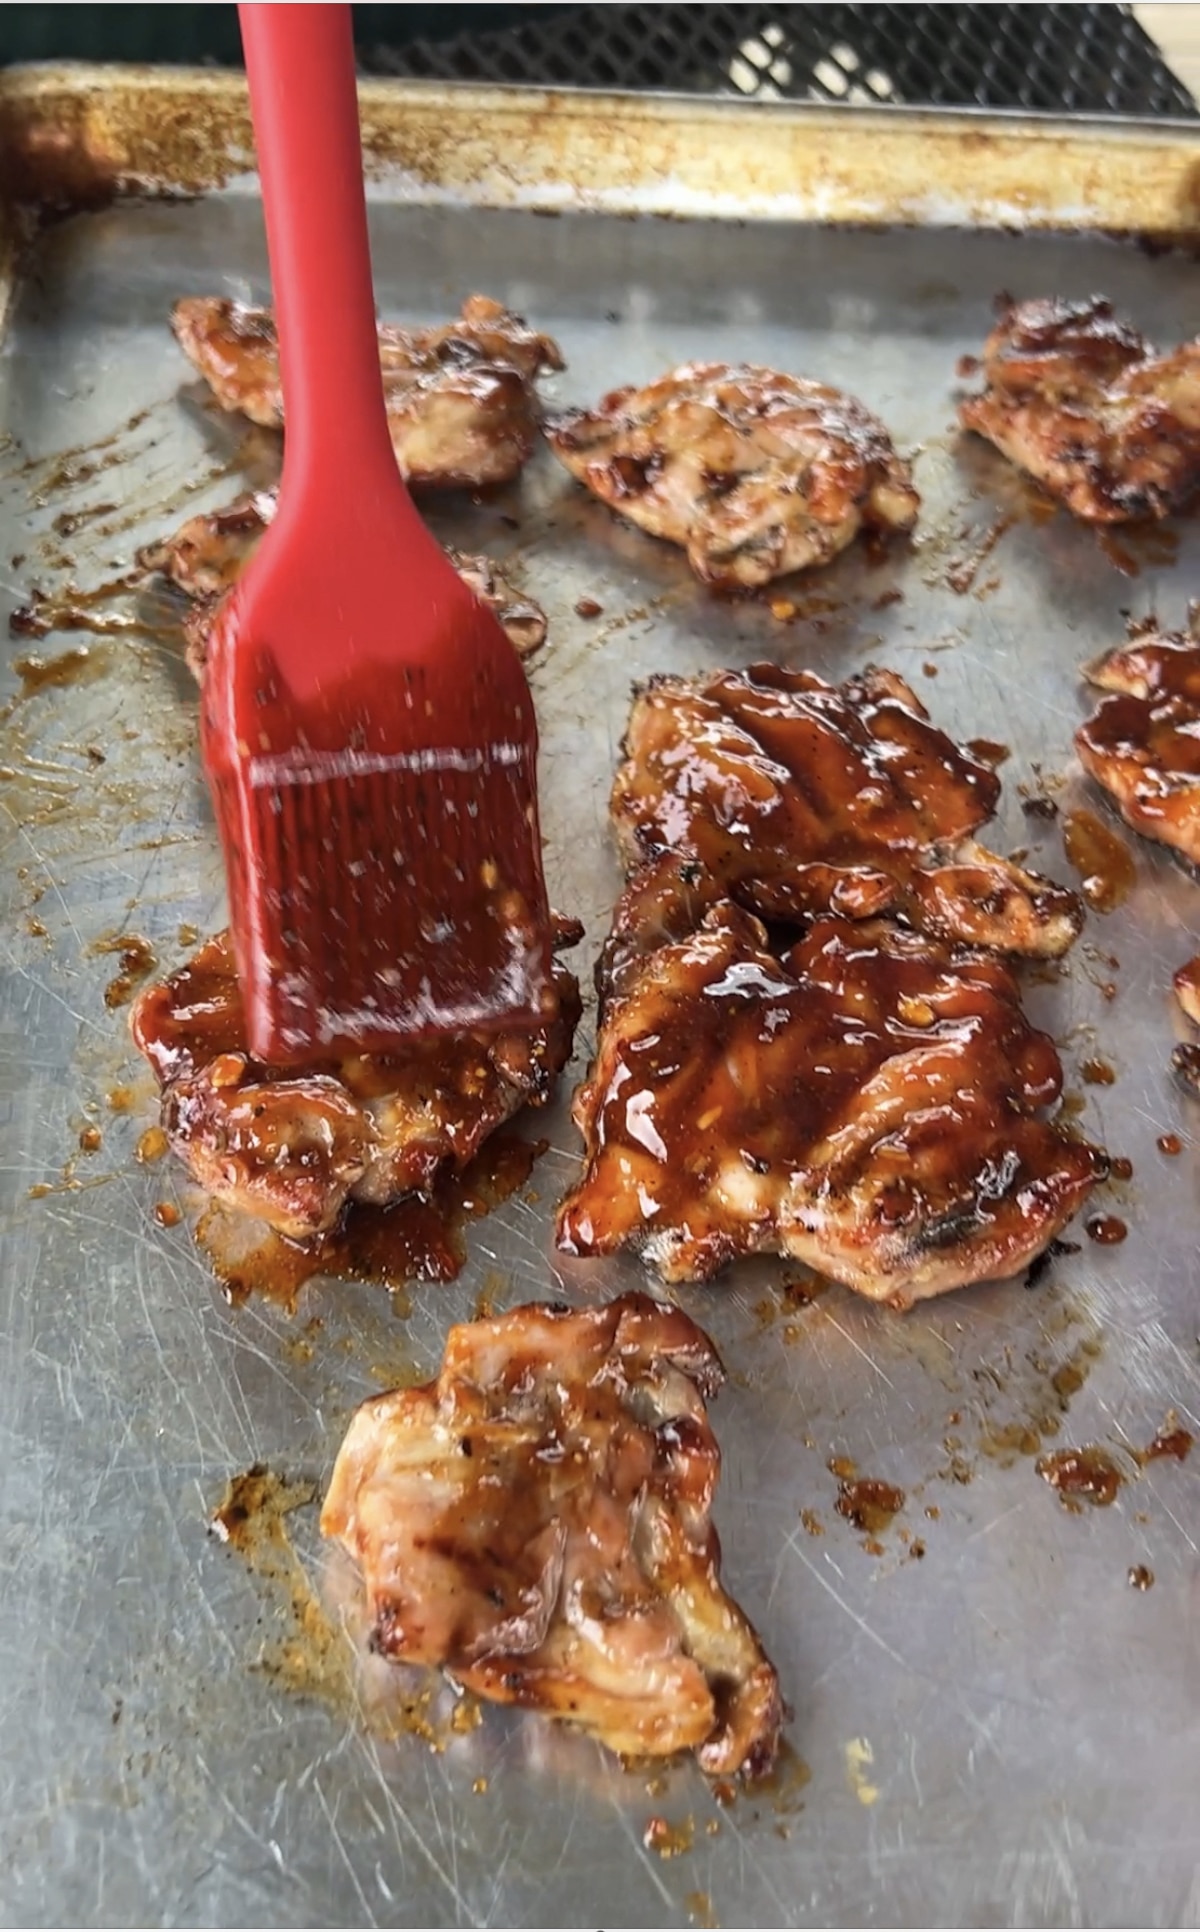 Brushing bbq sauce on grilled chicken.